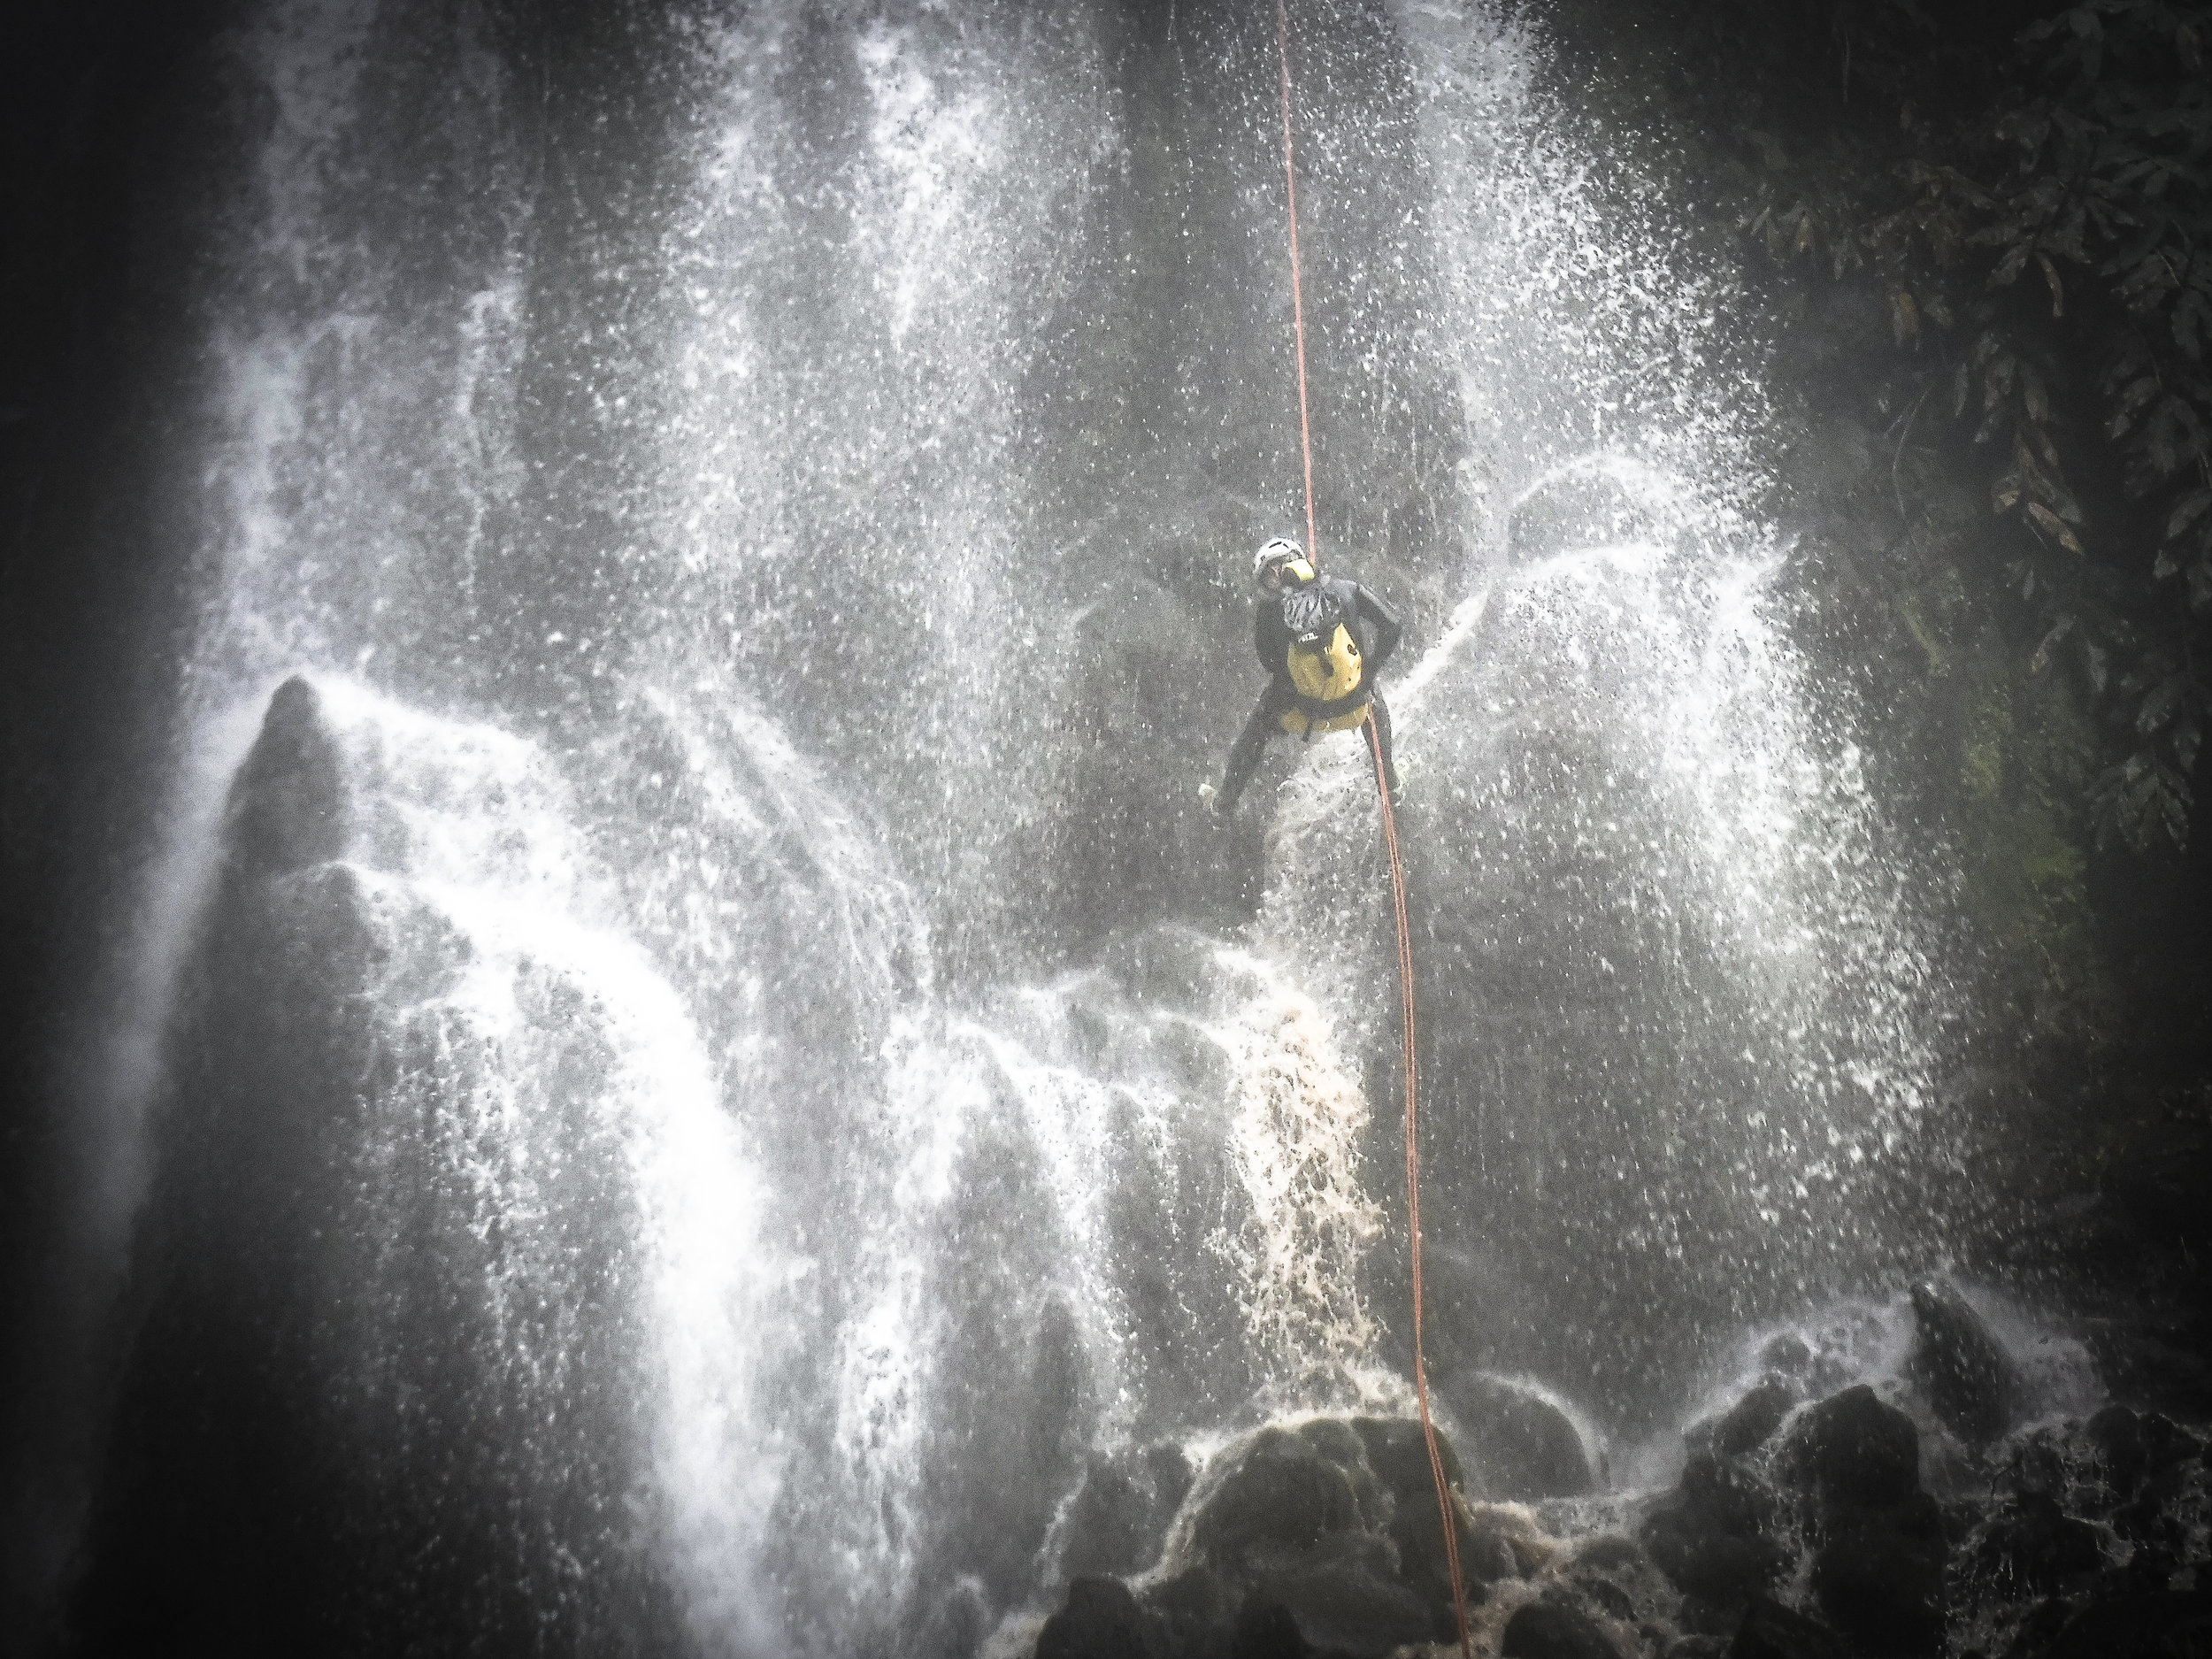 Azores Canyoning, Rapelling the Waterfall - Azores Connections.jpg